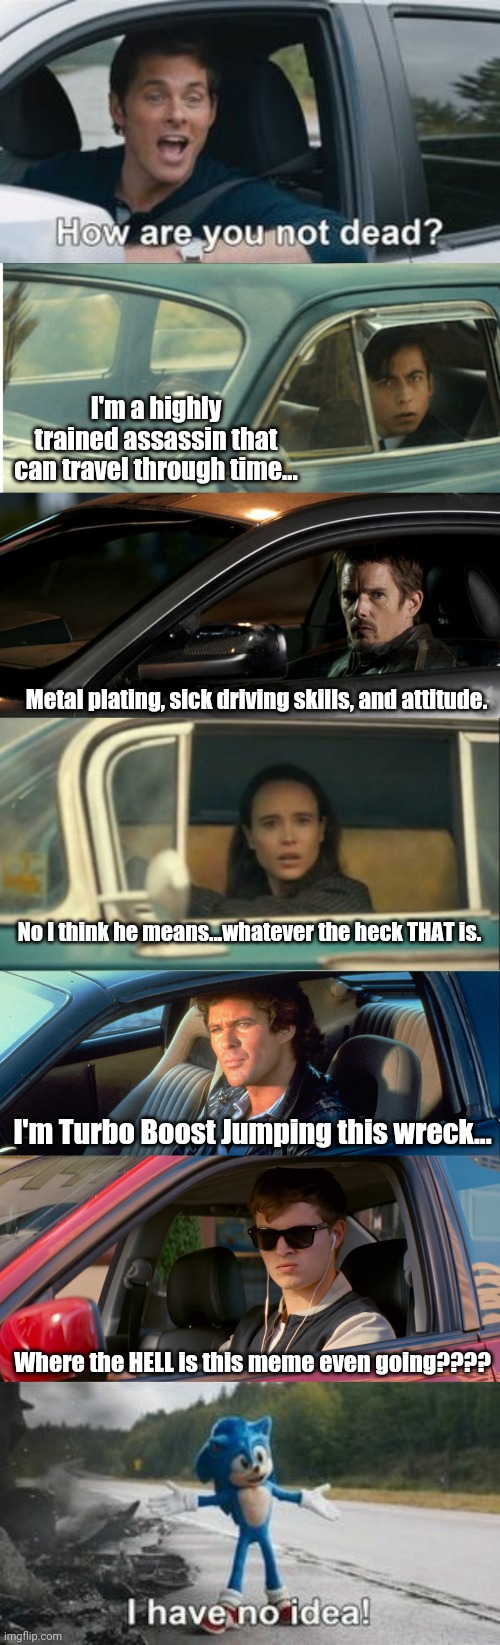 Mash Up central | I'm a highly trained assassin that can travel through time... Metal plating, sick driving skills, and attitude. No I think he means...whatever the heck THAT is. I'm Turbo Boost Jumping this wreck... Where the HELL is this meme even going???? | image tagged in sonic,umbrella,knight rider | made w/ Imgflip meme maker